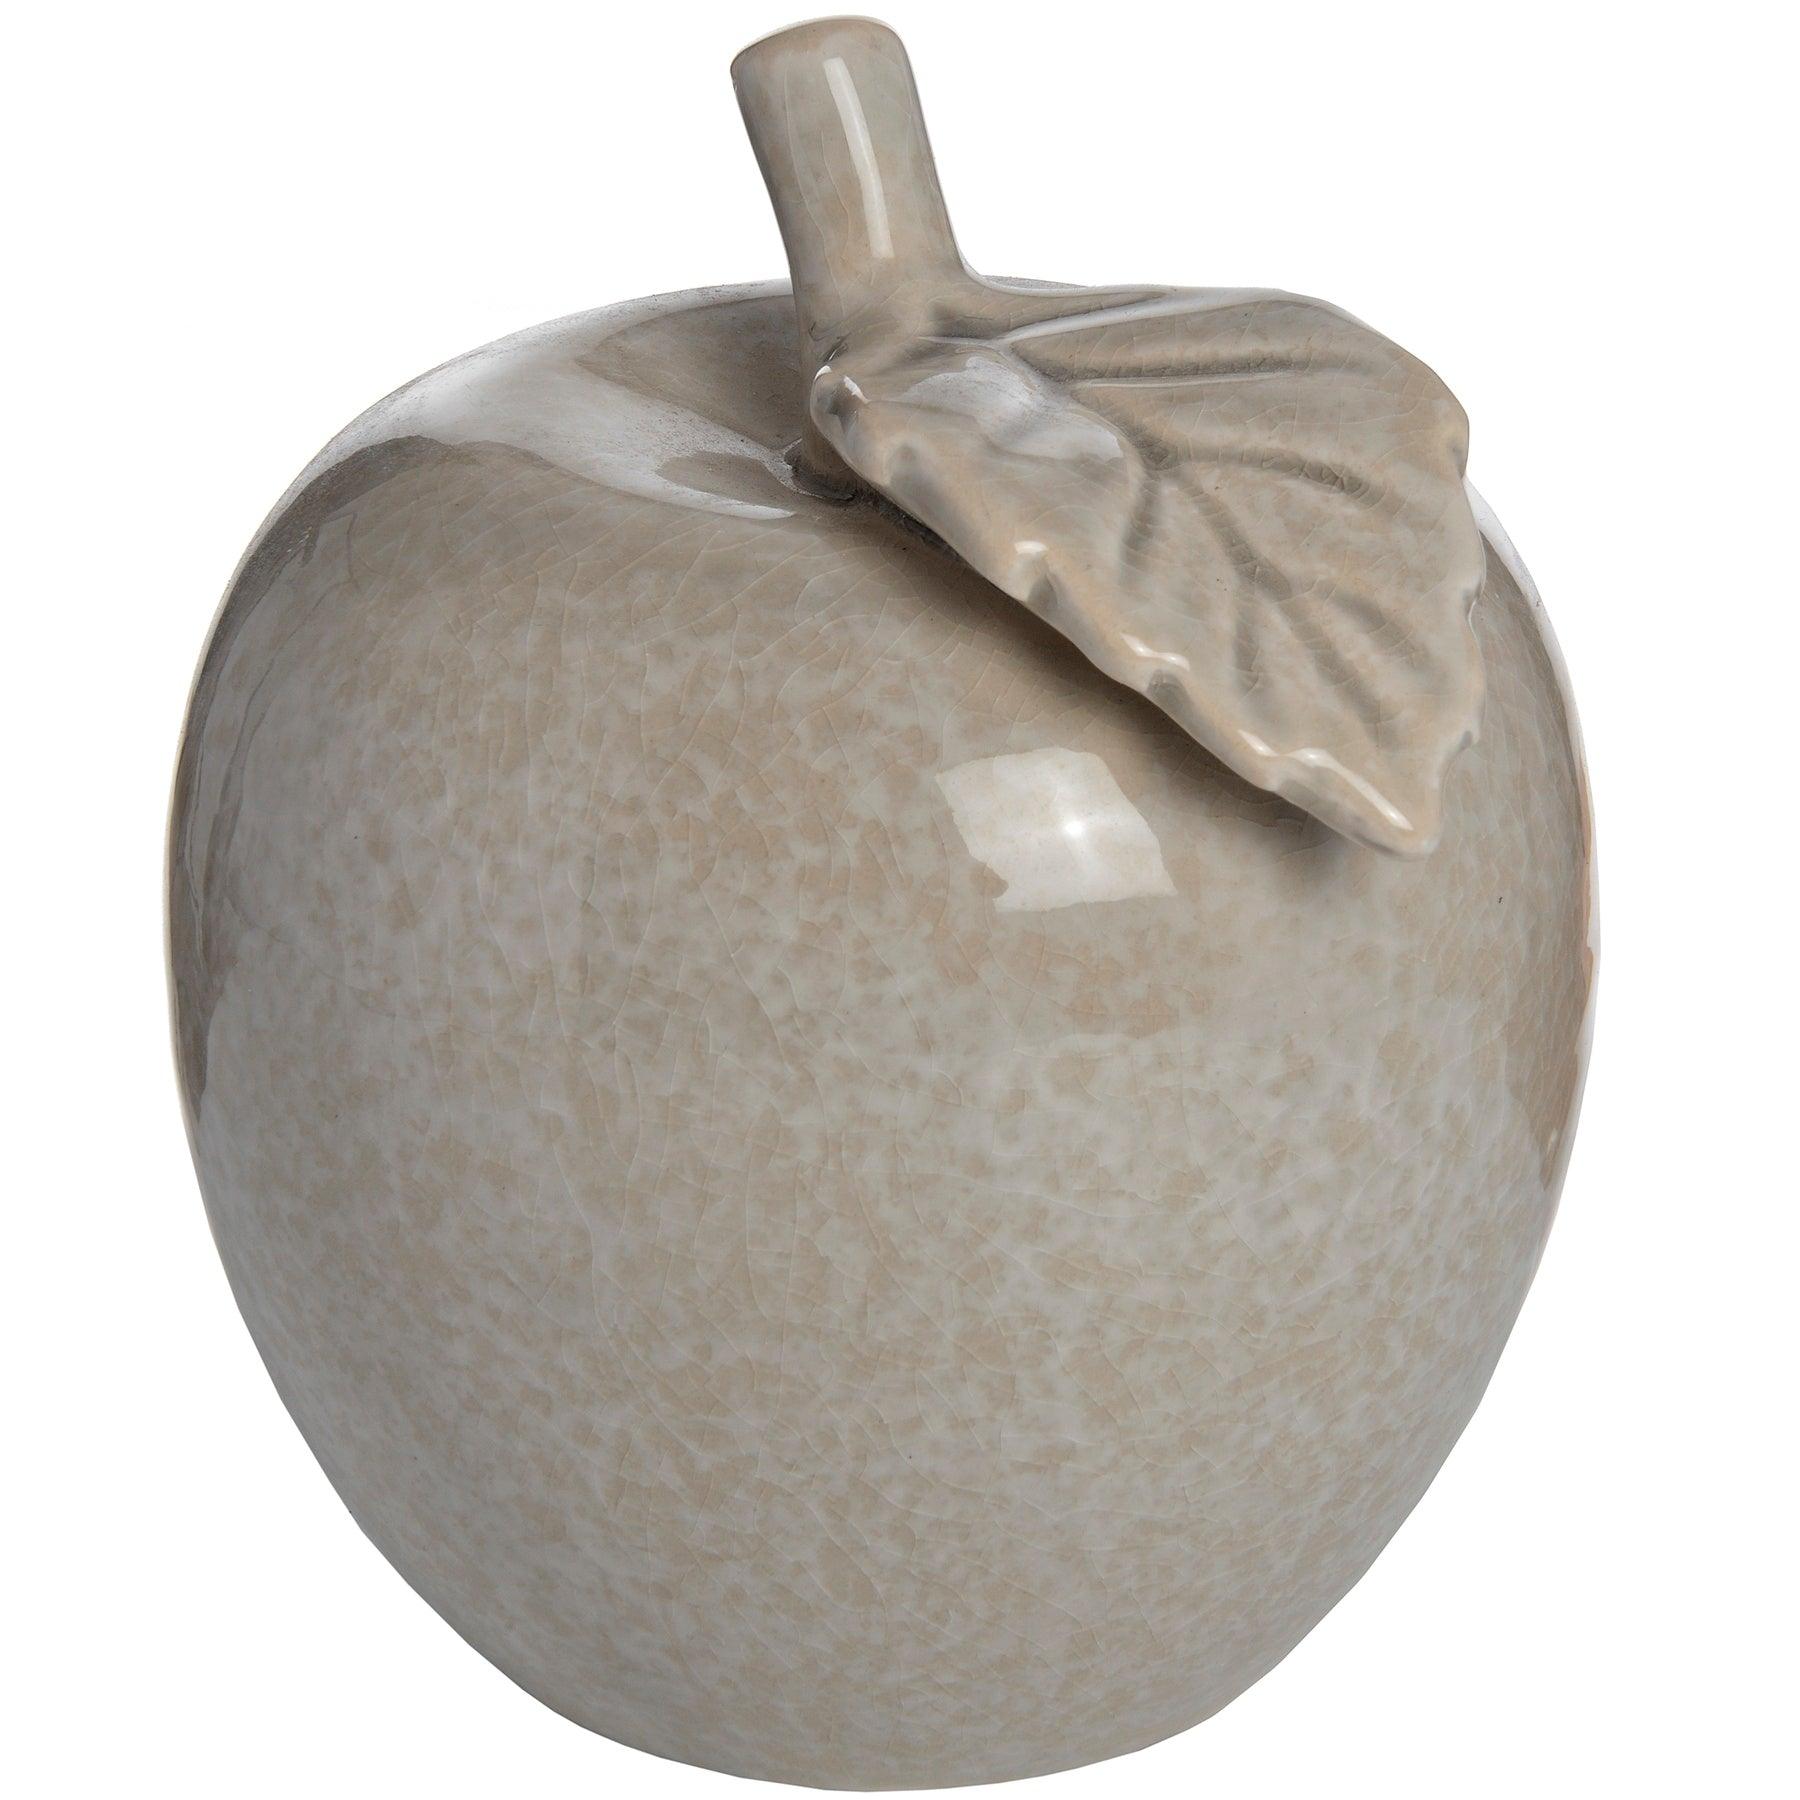 View Antique Grey Small Ceramic Apple information